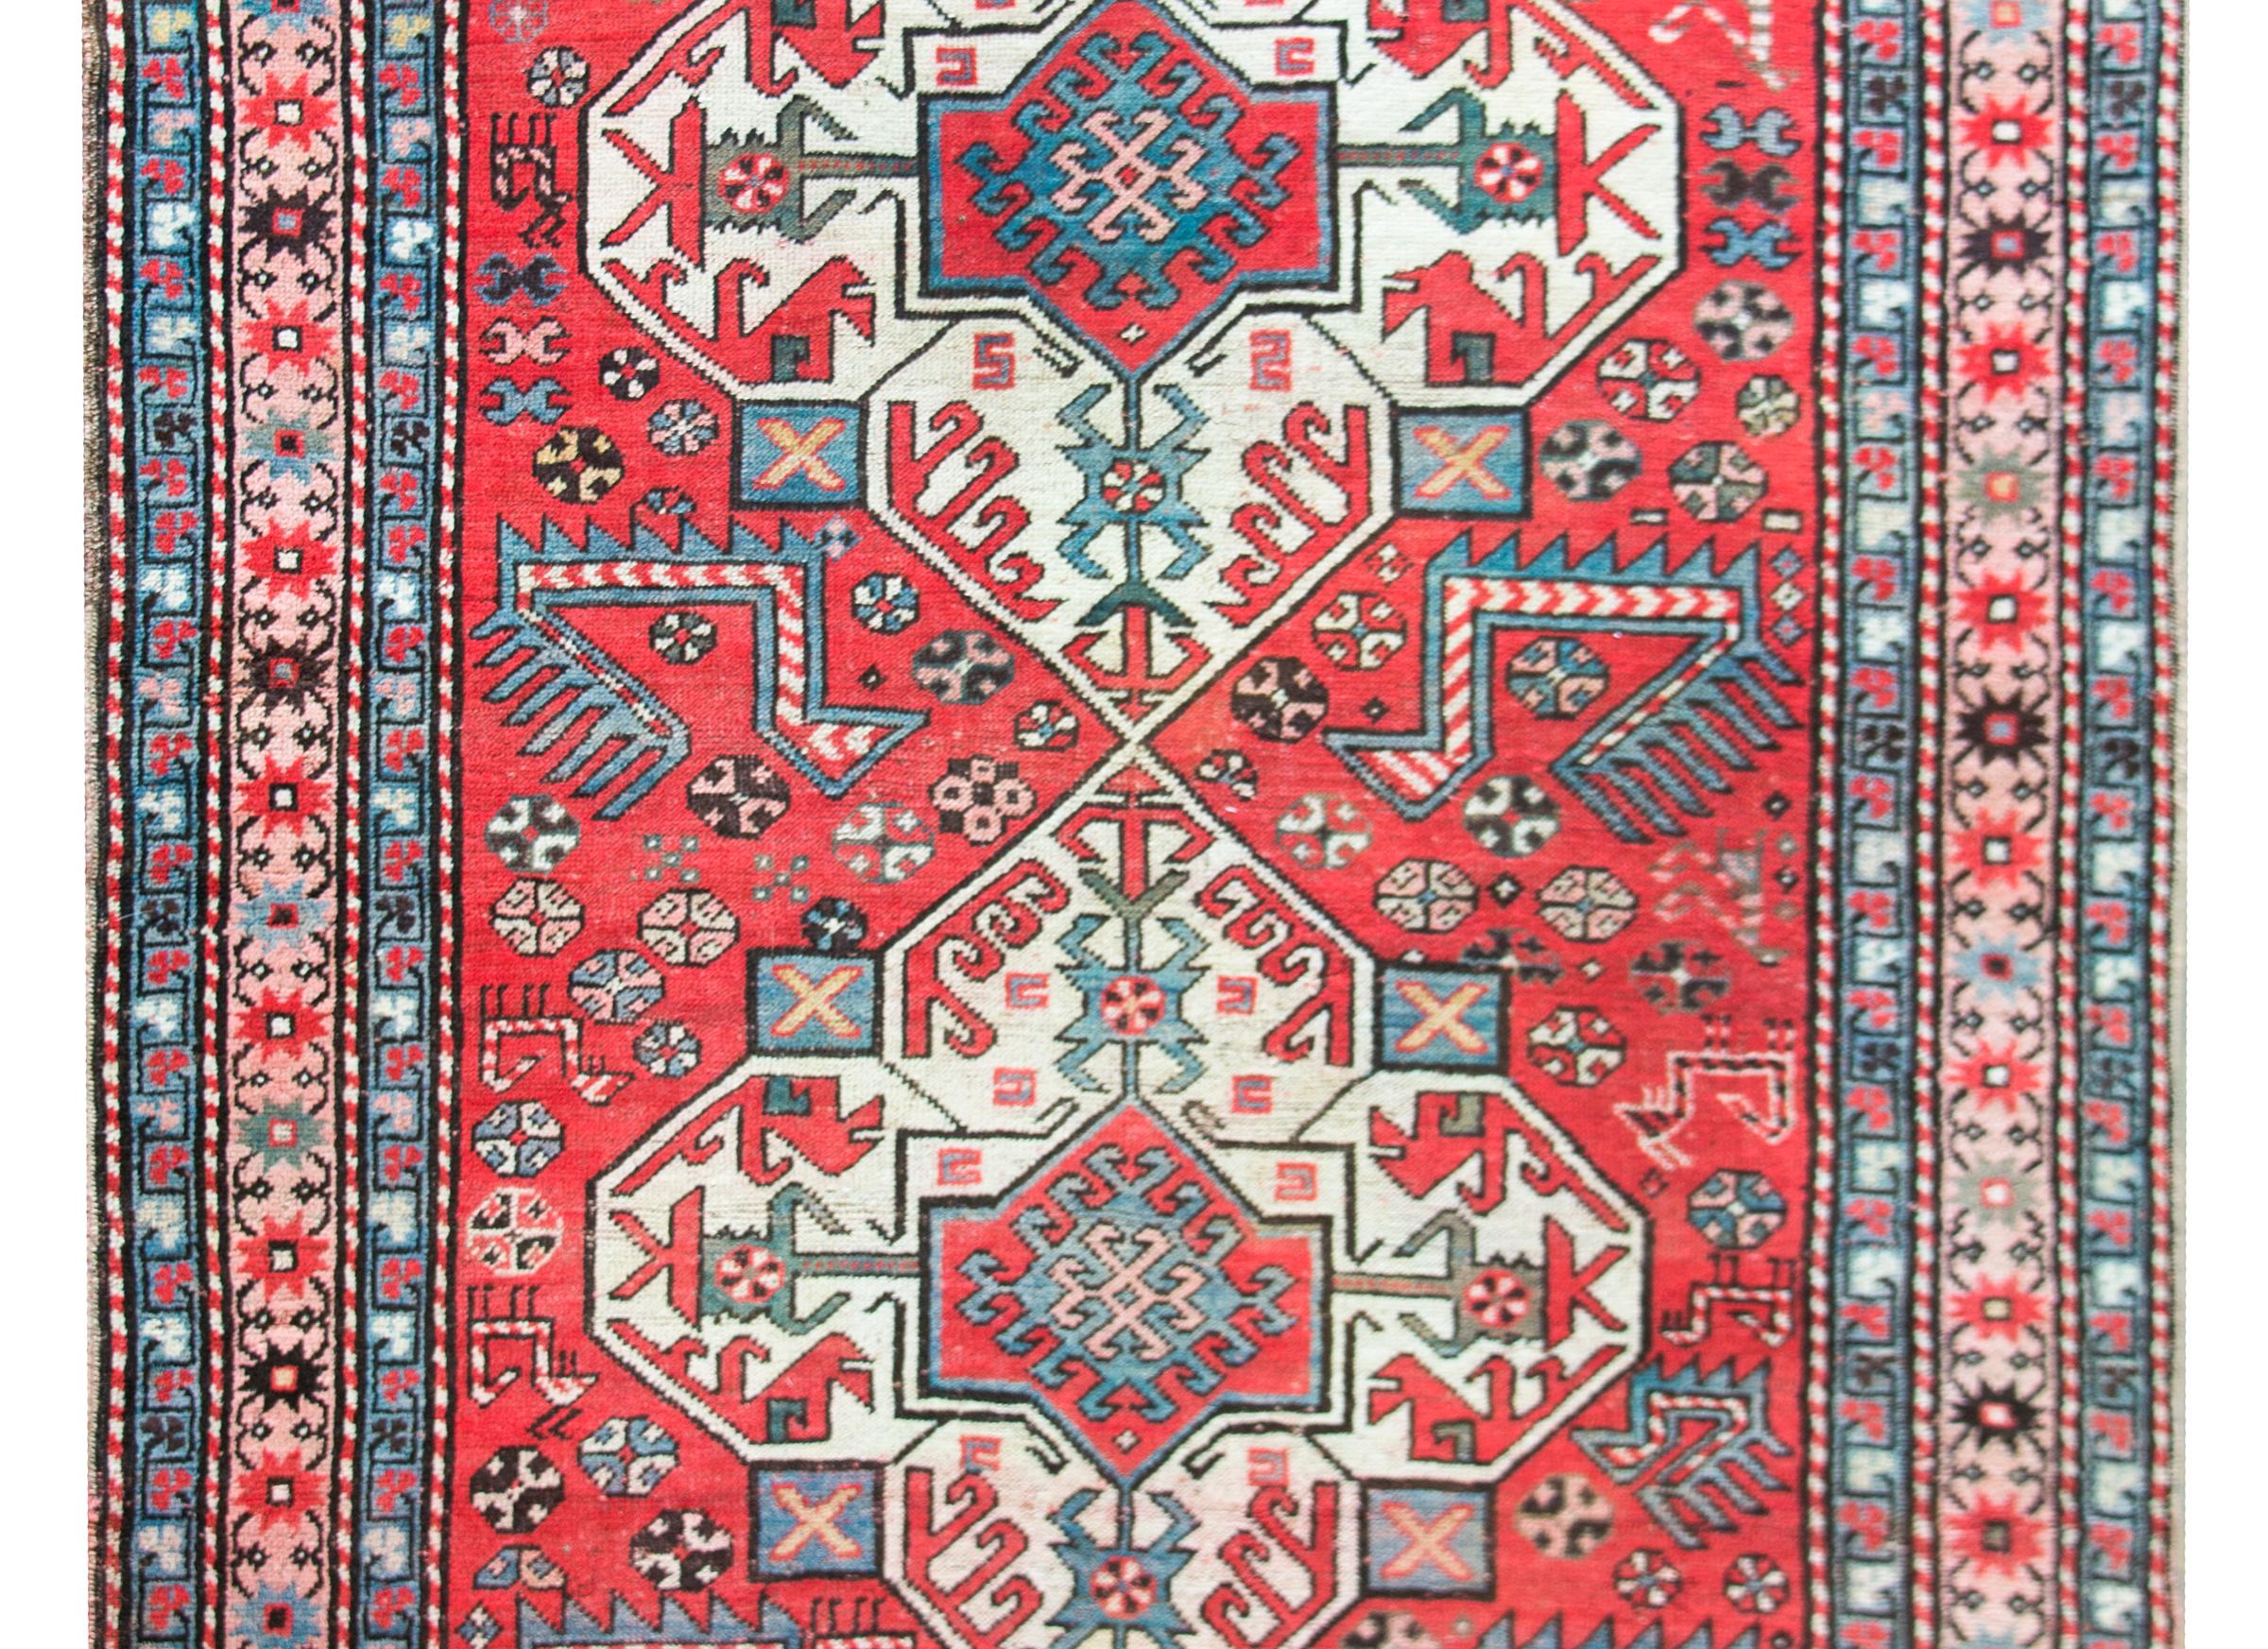 A remarkable early 20th century Persian Kazak rug with the most wonderful pattern containing two large white diamond medallions with stylized floral patterns amidst a field of more stylized flowers, goats, and large chickens, all woven in crimson,